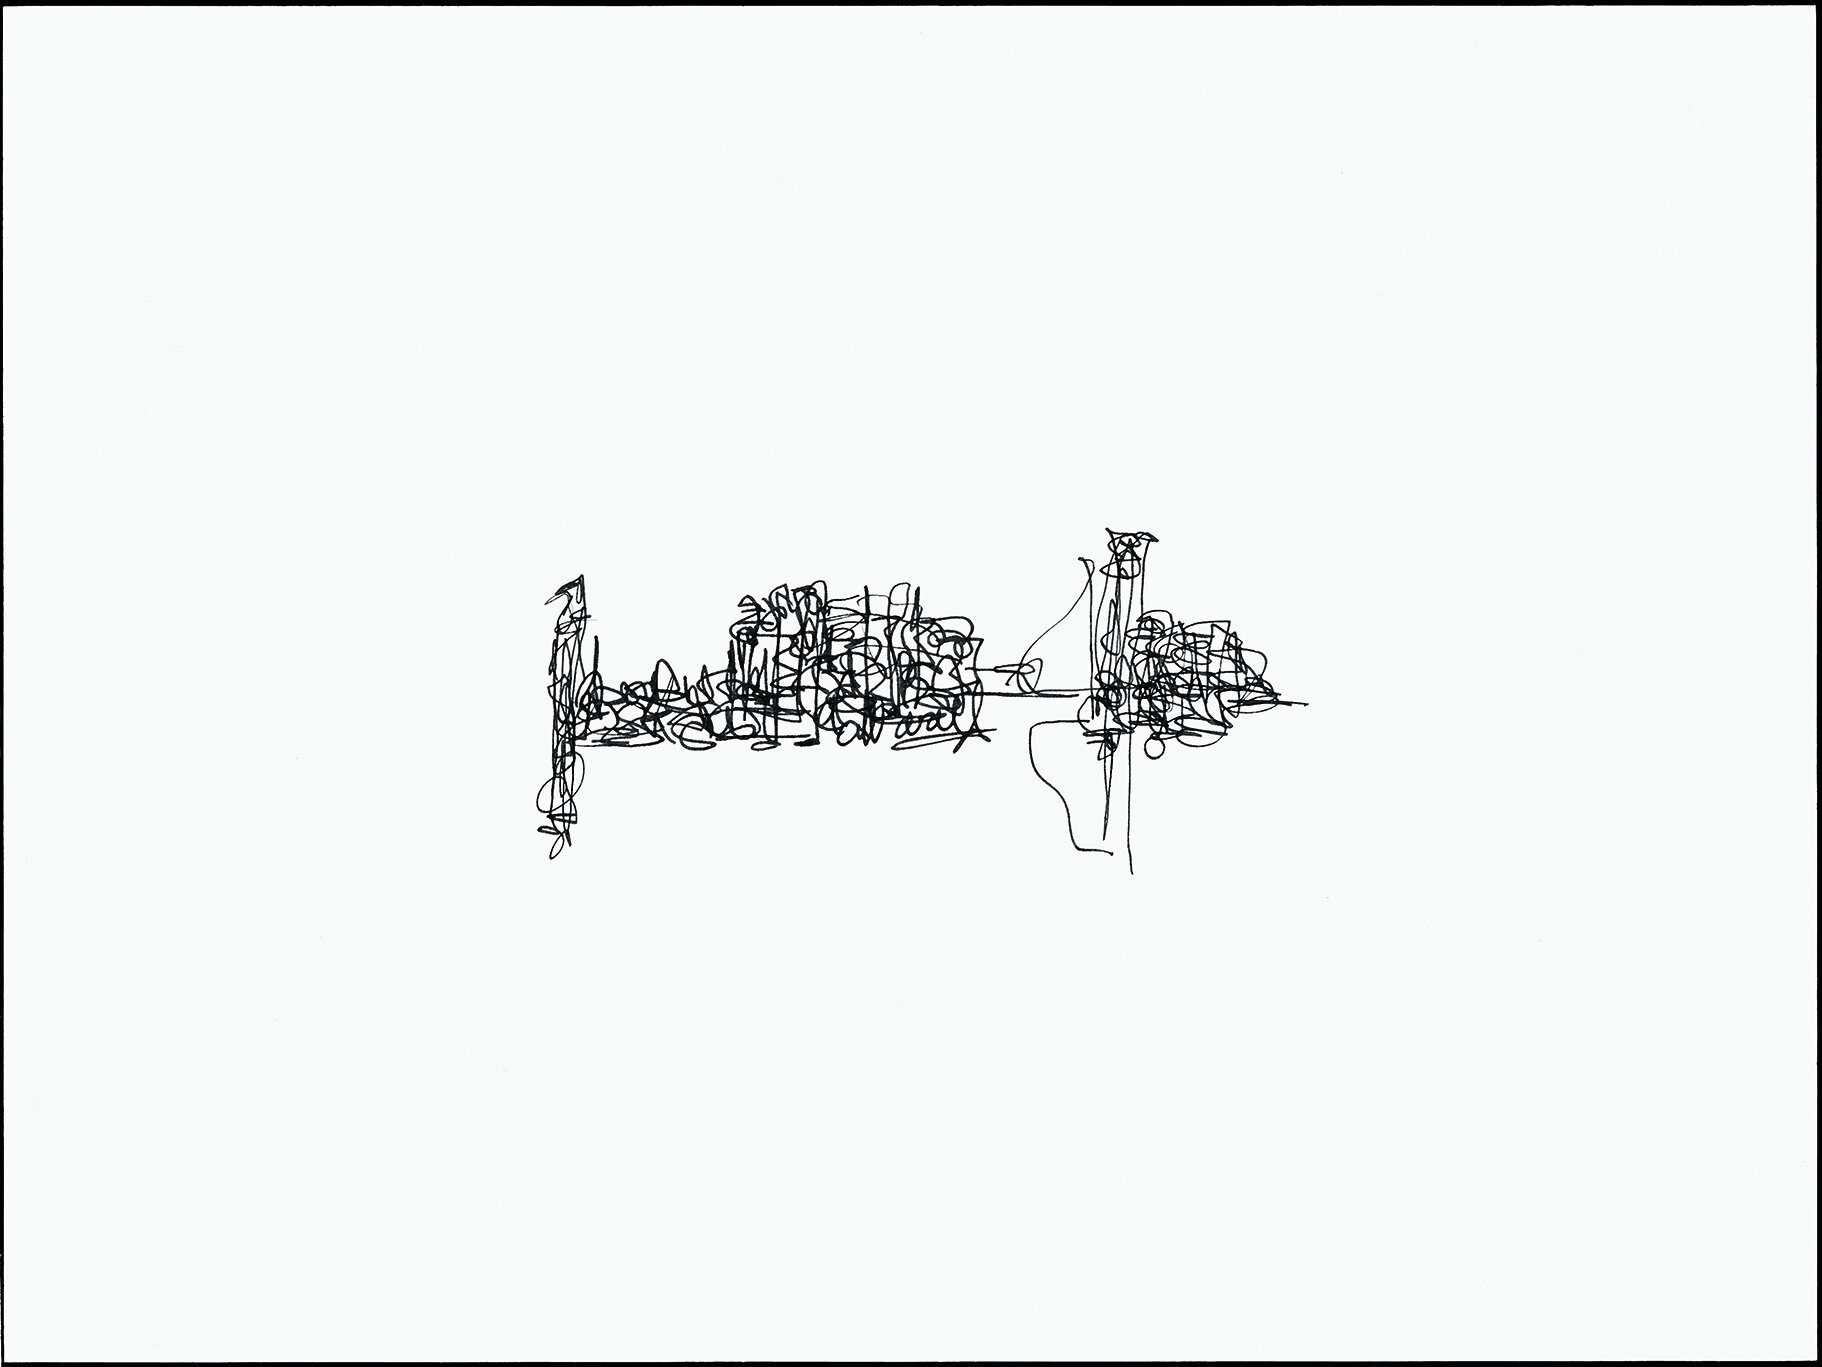  Renee Gladman, Prose Architectures 13, ink on paper, 9 x 12 inches, 2013.  